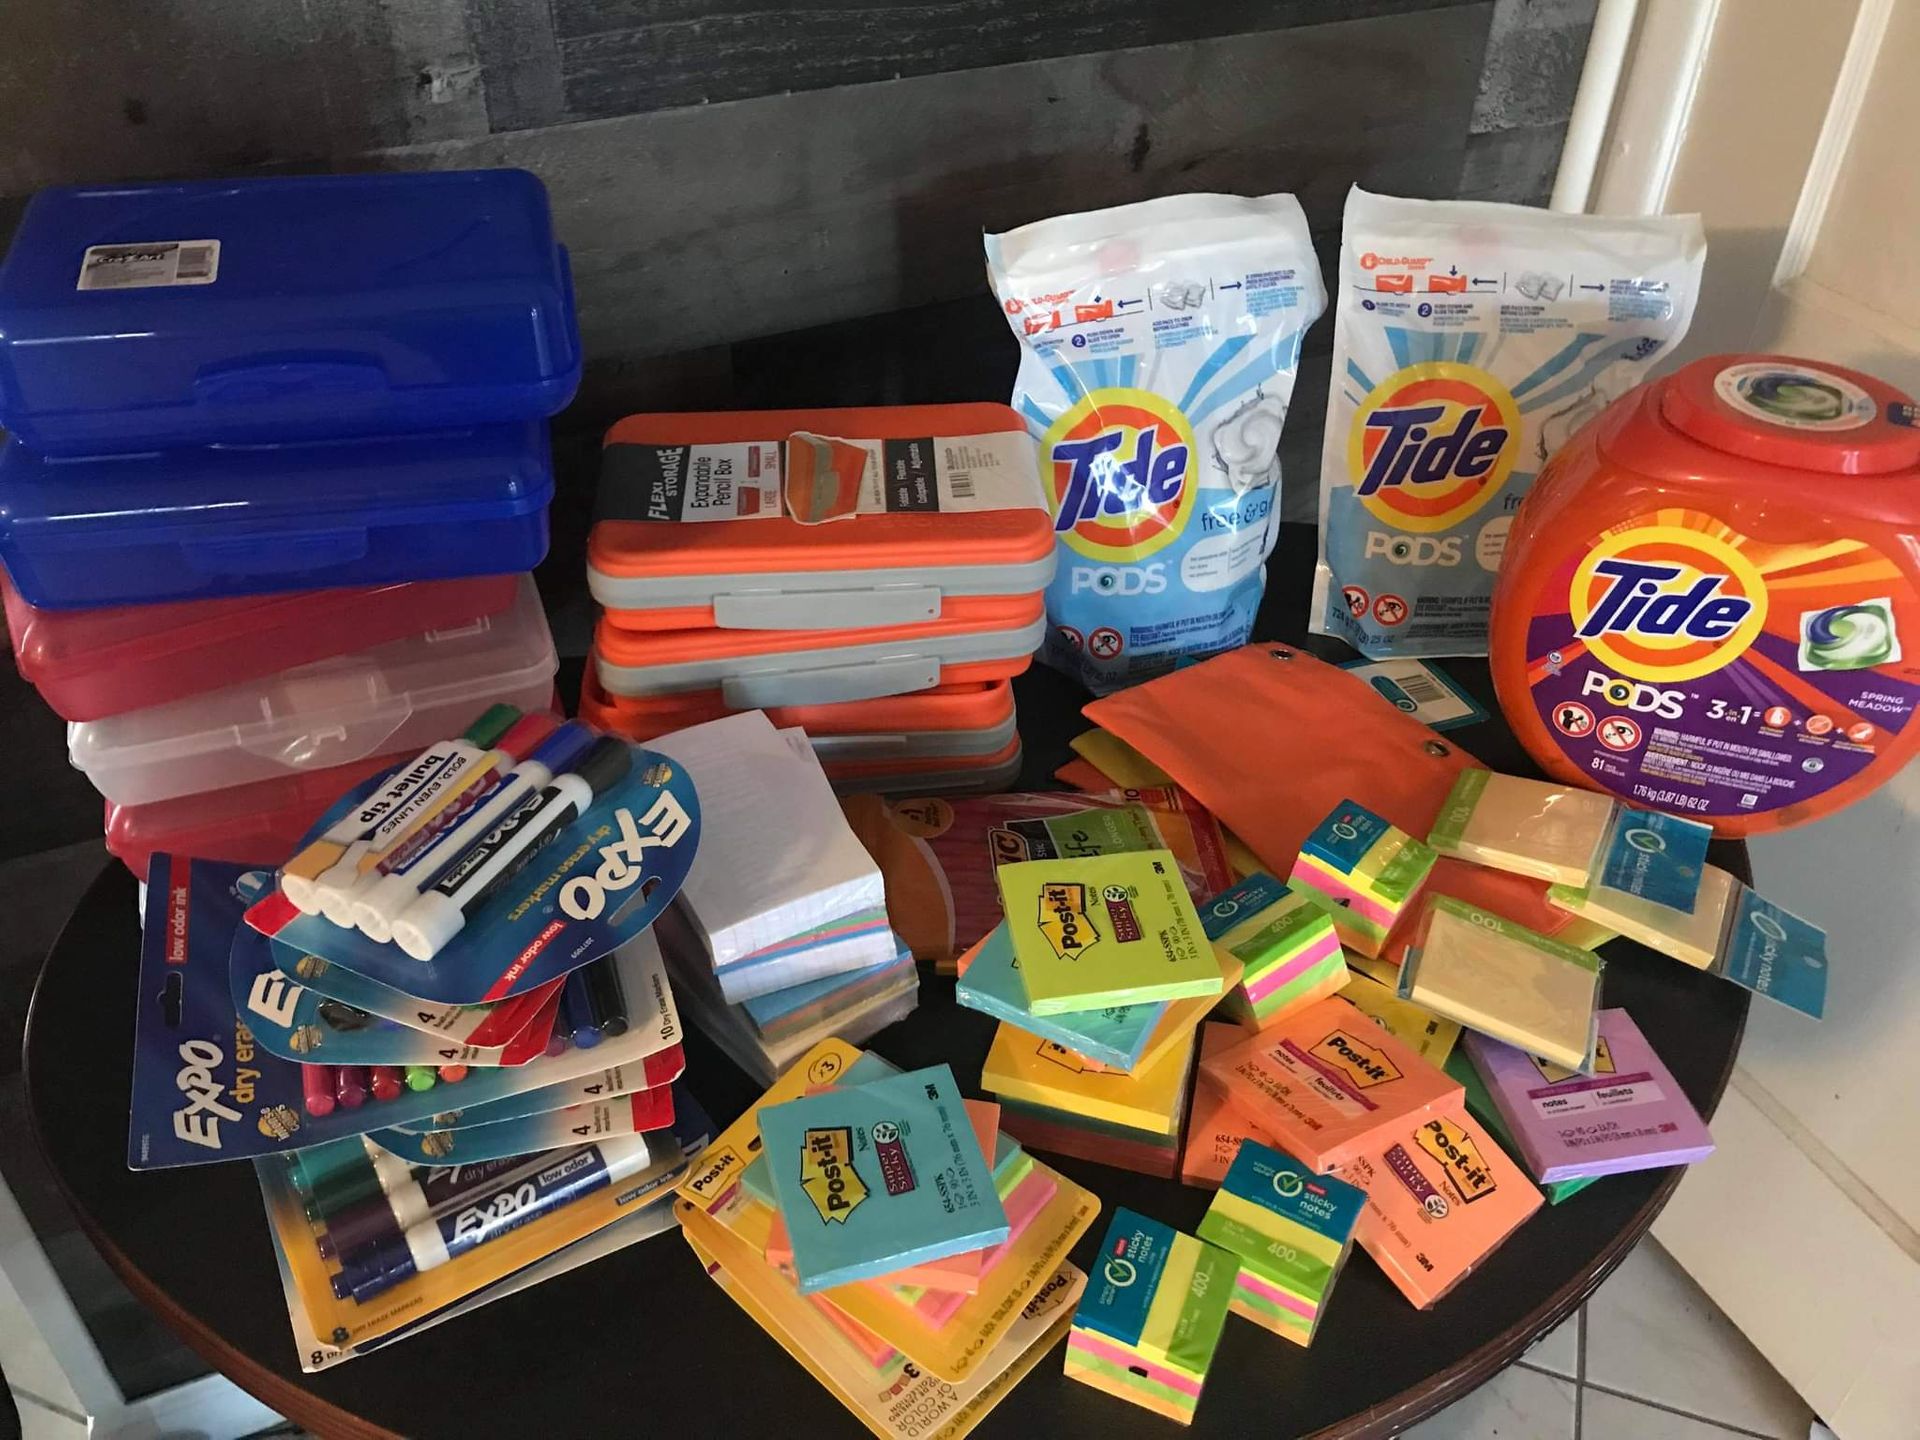 Supply Drive haul from generous supporters